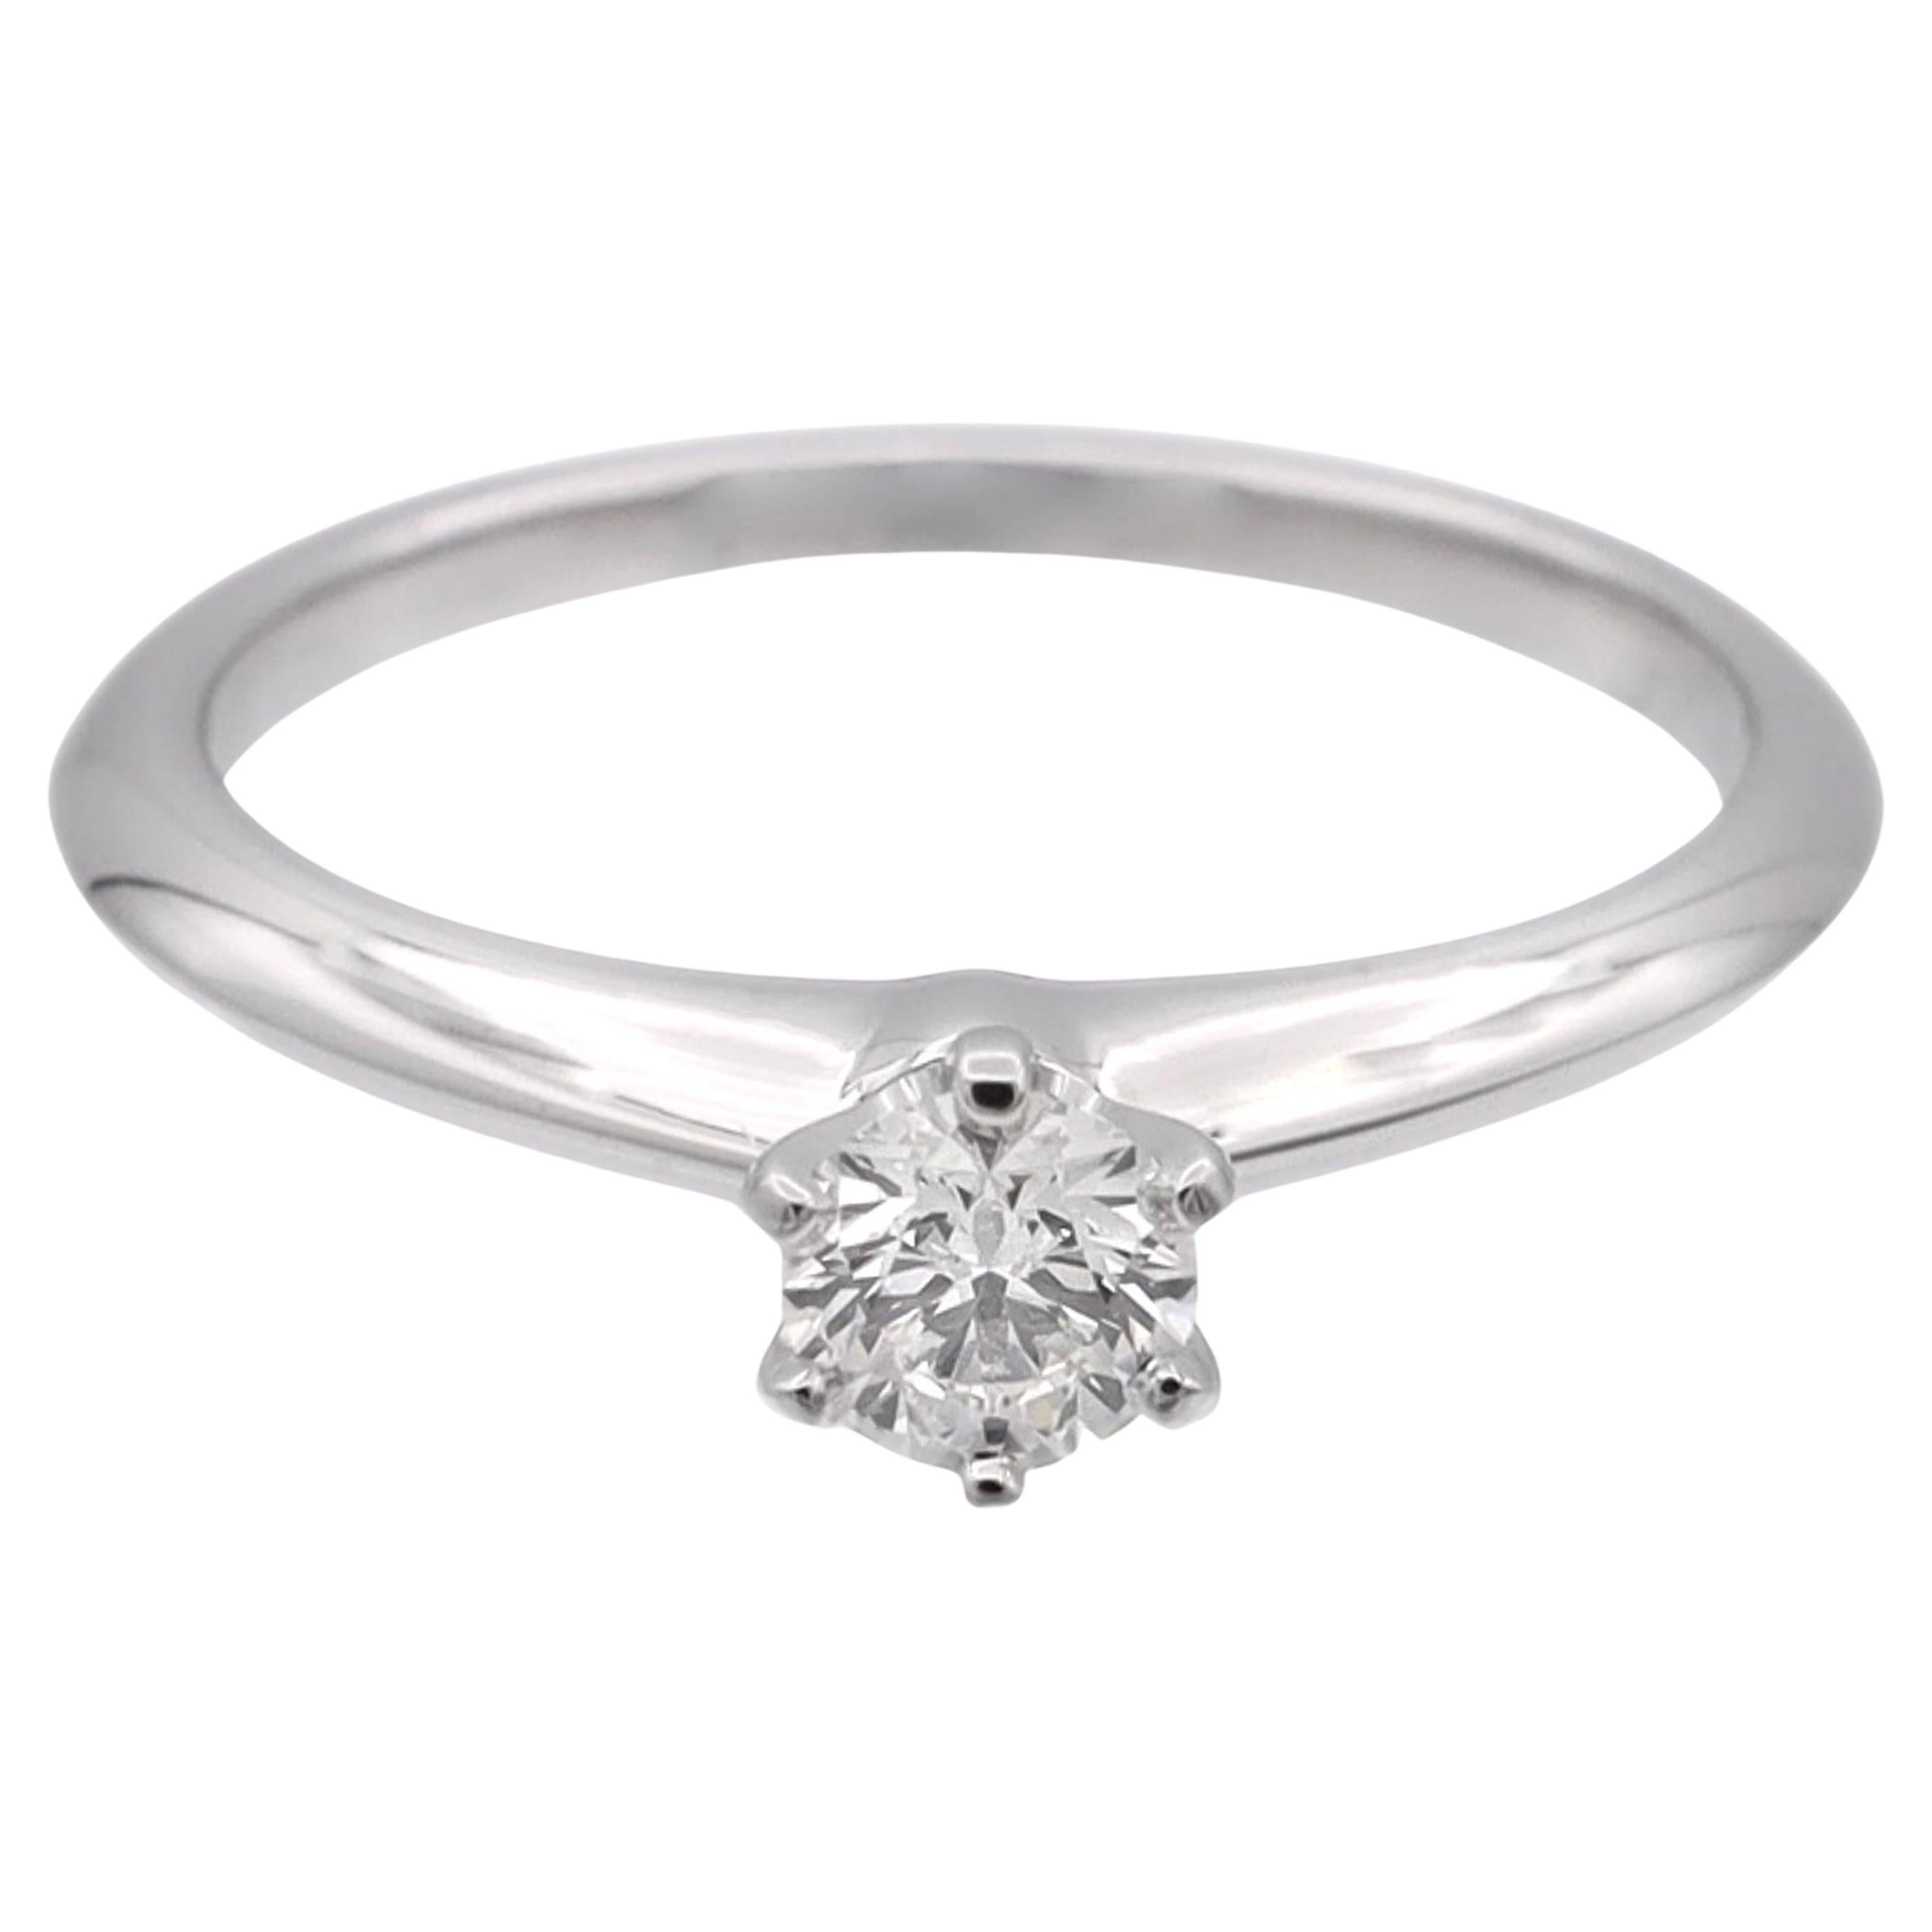 How much is Tiffany and co engagement ring?